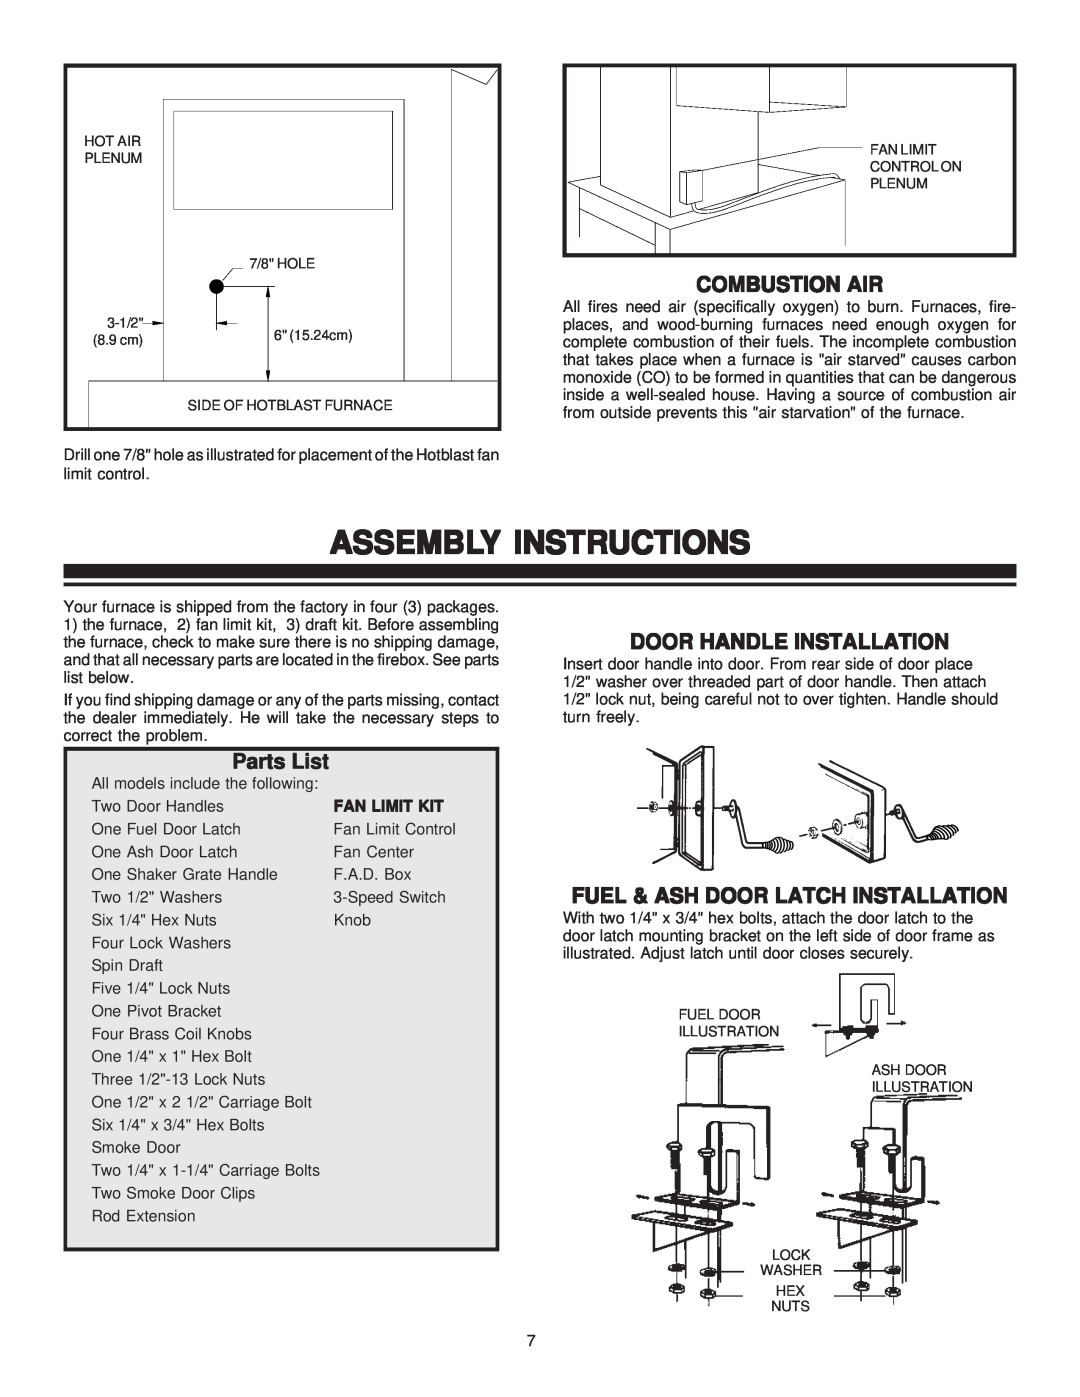 United States Stove 1800GC Assembly Instructions, Combustion Air, Parts List, Door Handle Installation, Fan Limit Kit 